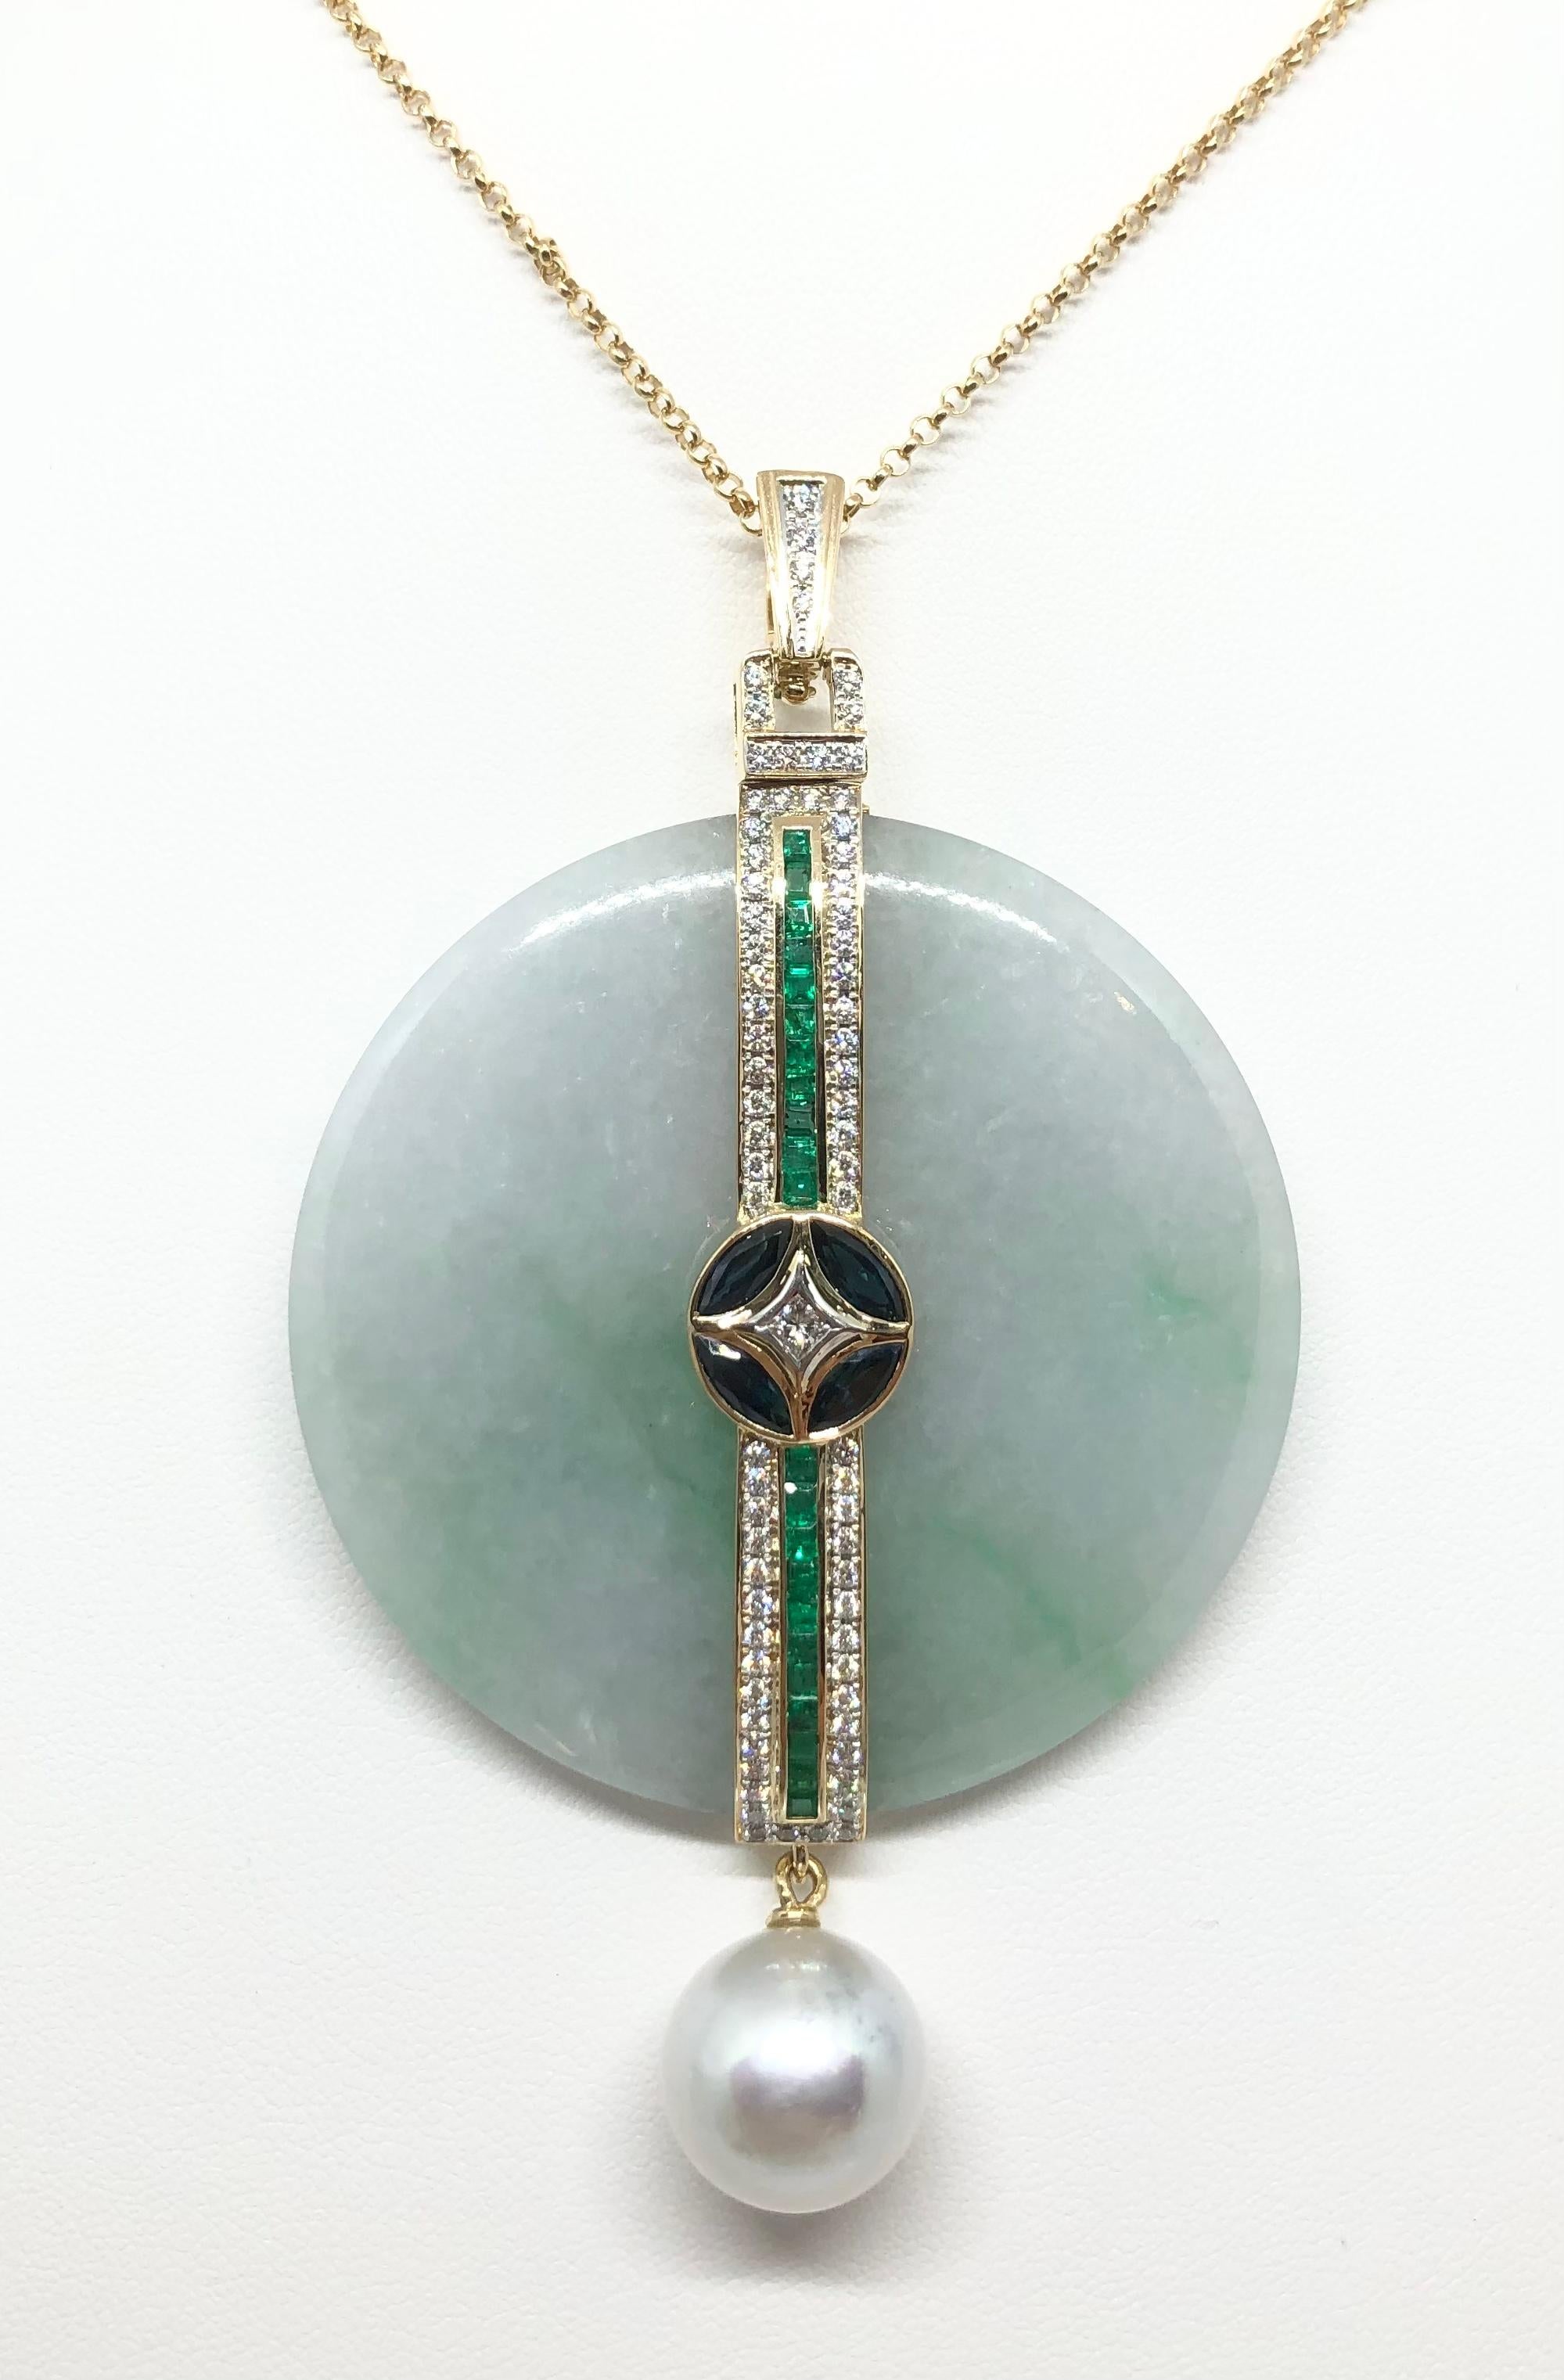 South Sea Pearl, Jade 186.39 carats, Emerald 0.67 carat, Diamond 0.84 carat and Blue Sapphire 1.84 carat Pendant set in 18 Karat Gold Settings
(chain not included)

Width: 5.4 cm 
Length: 9.2 cm
Total Weight: 54.93 grams

South Sea Pearl: 14 mm

